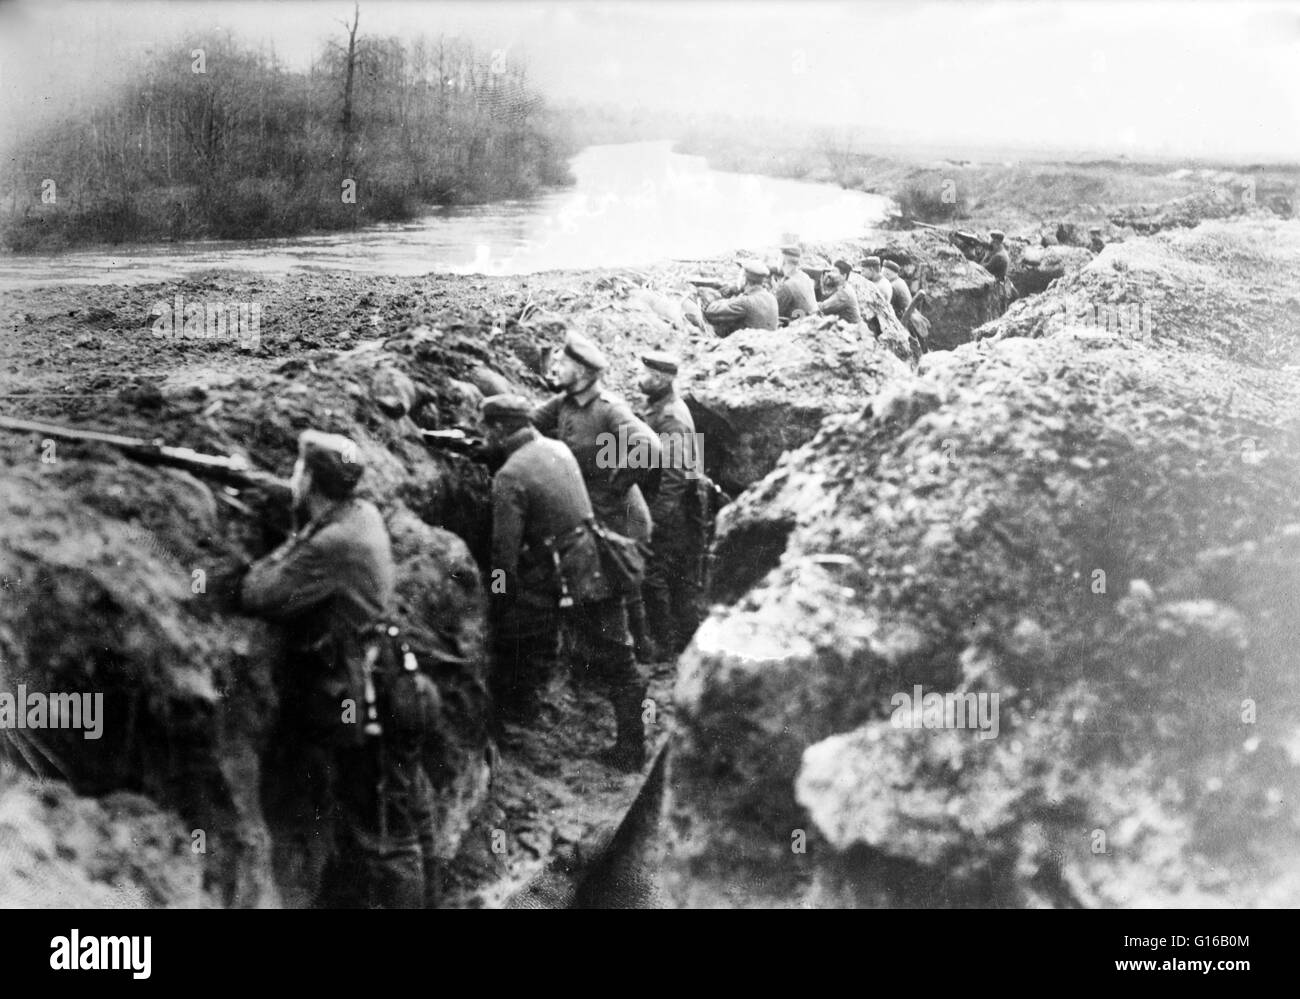 German trenches on the Aisne. The First Battle of the Aisne was the Allied follow-up offensive against the right wing of the German First Army (led by Alexander von Kluck) and Second Army (led by Karl von Bülow) as they retreated after the First Battle of Stock Photo